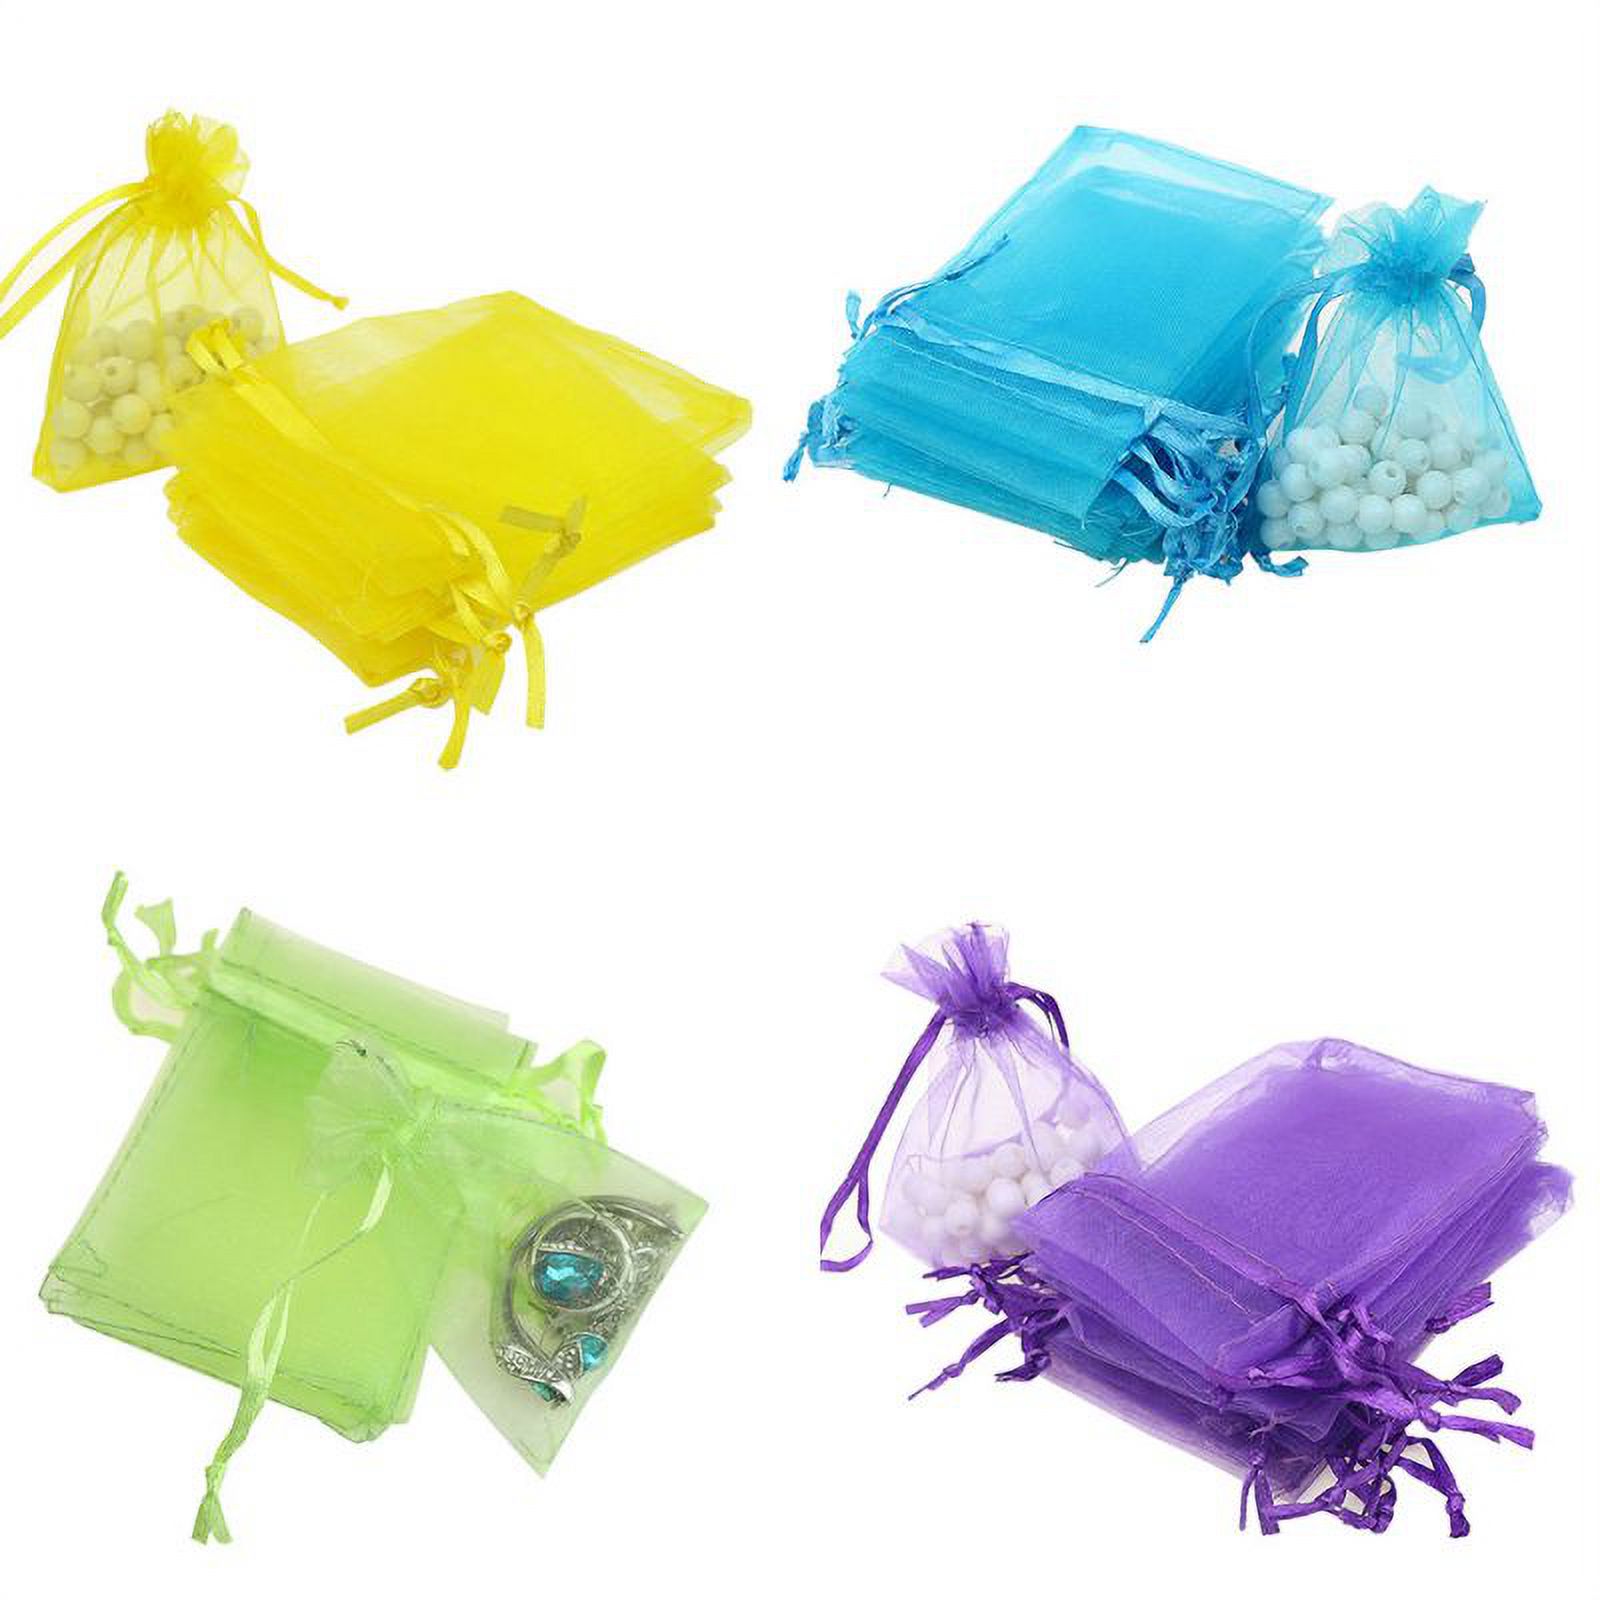 SUPERHOMUSE 100PCS Sheer Drawstring Organza Bags Jewelry Pouche Wedding Party Favor Gift Bag - image 2 of 8